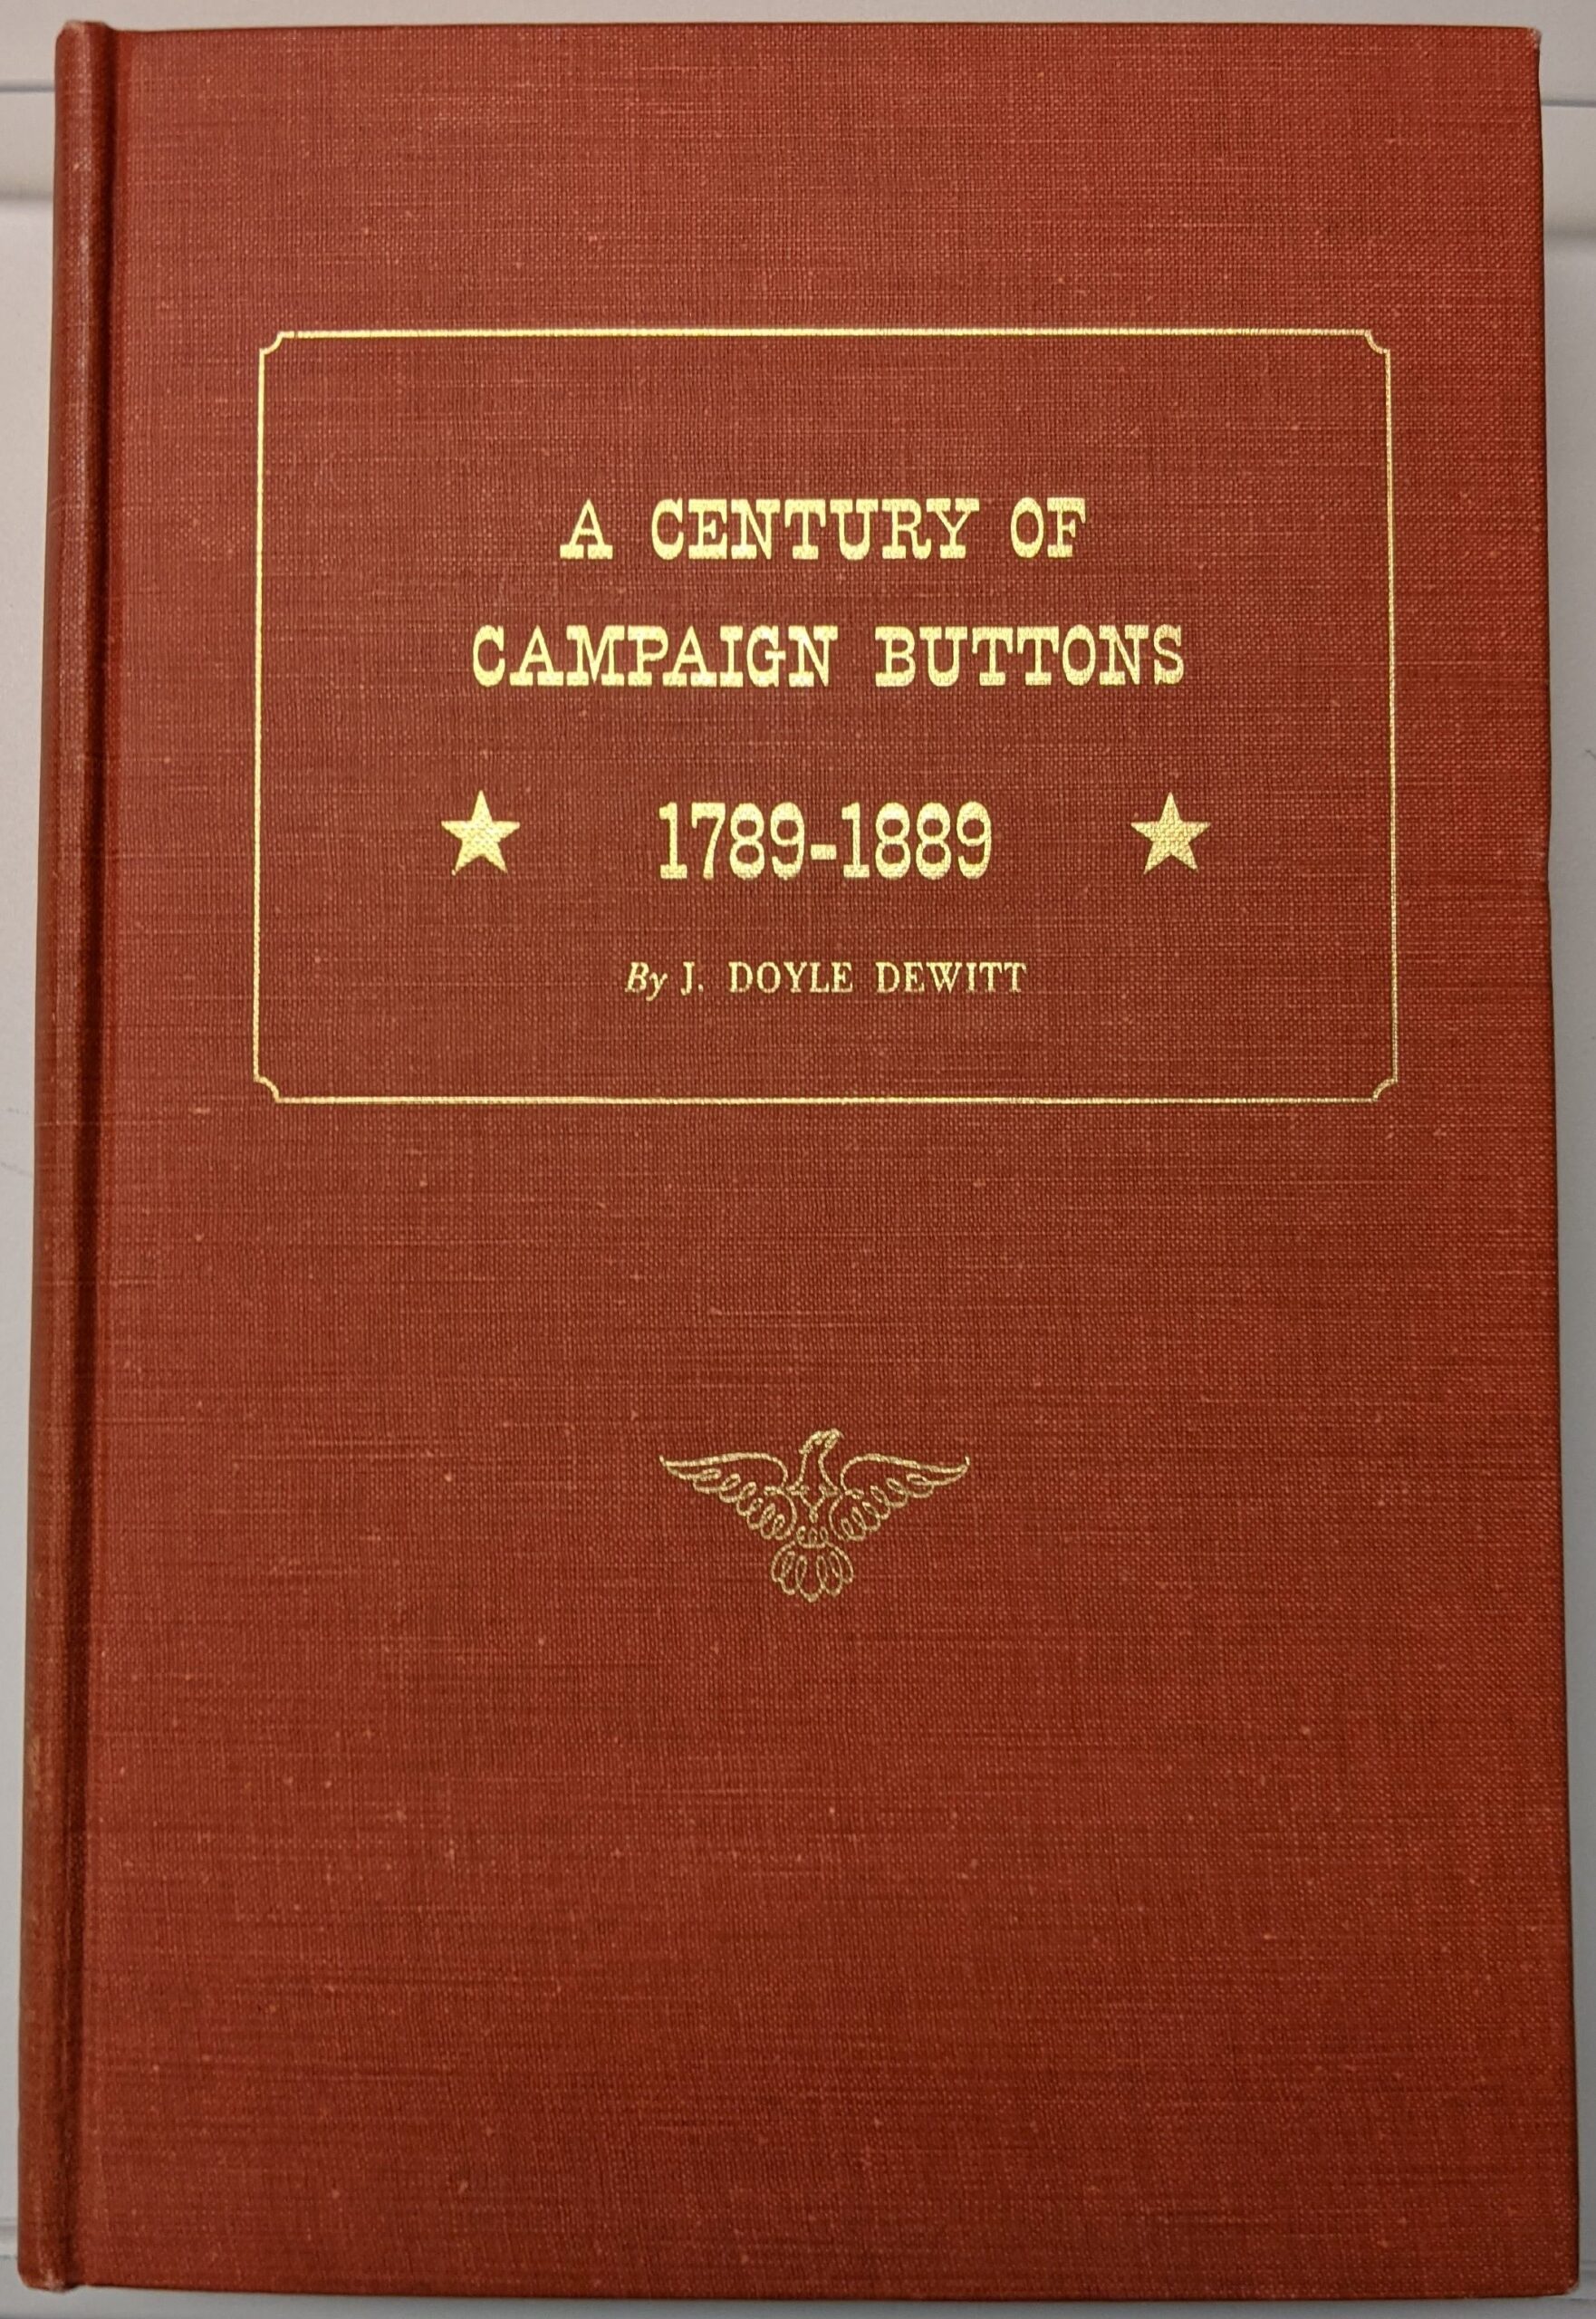 <i>A century of campaign buttons, 1789-1889; a descriptive list of medalets, tokens, buttons, ferrotypes, and other lapel devices relating to the national political campaigns in the United States from 1789 to 1889.</i>